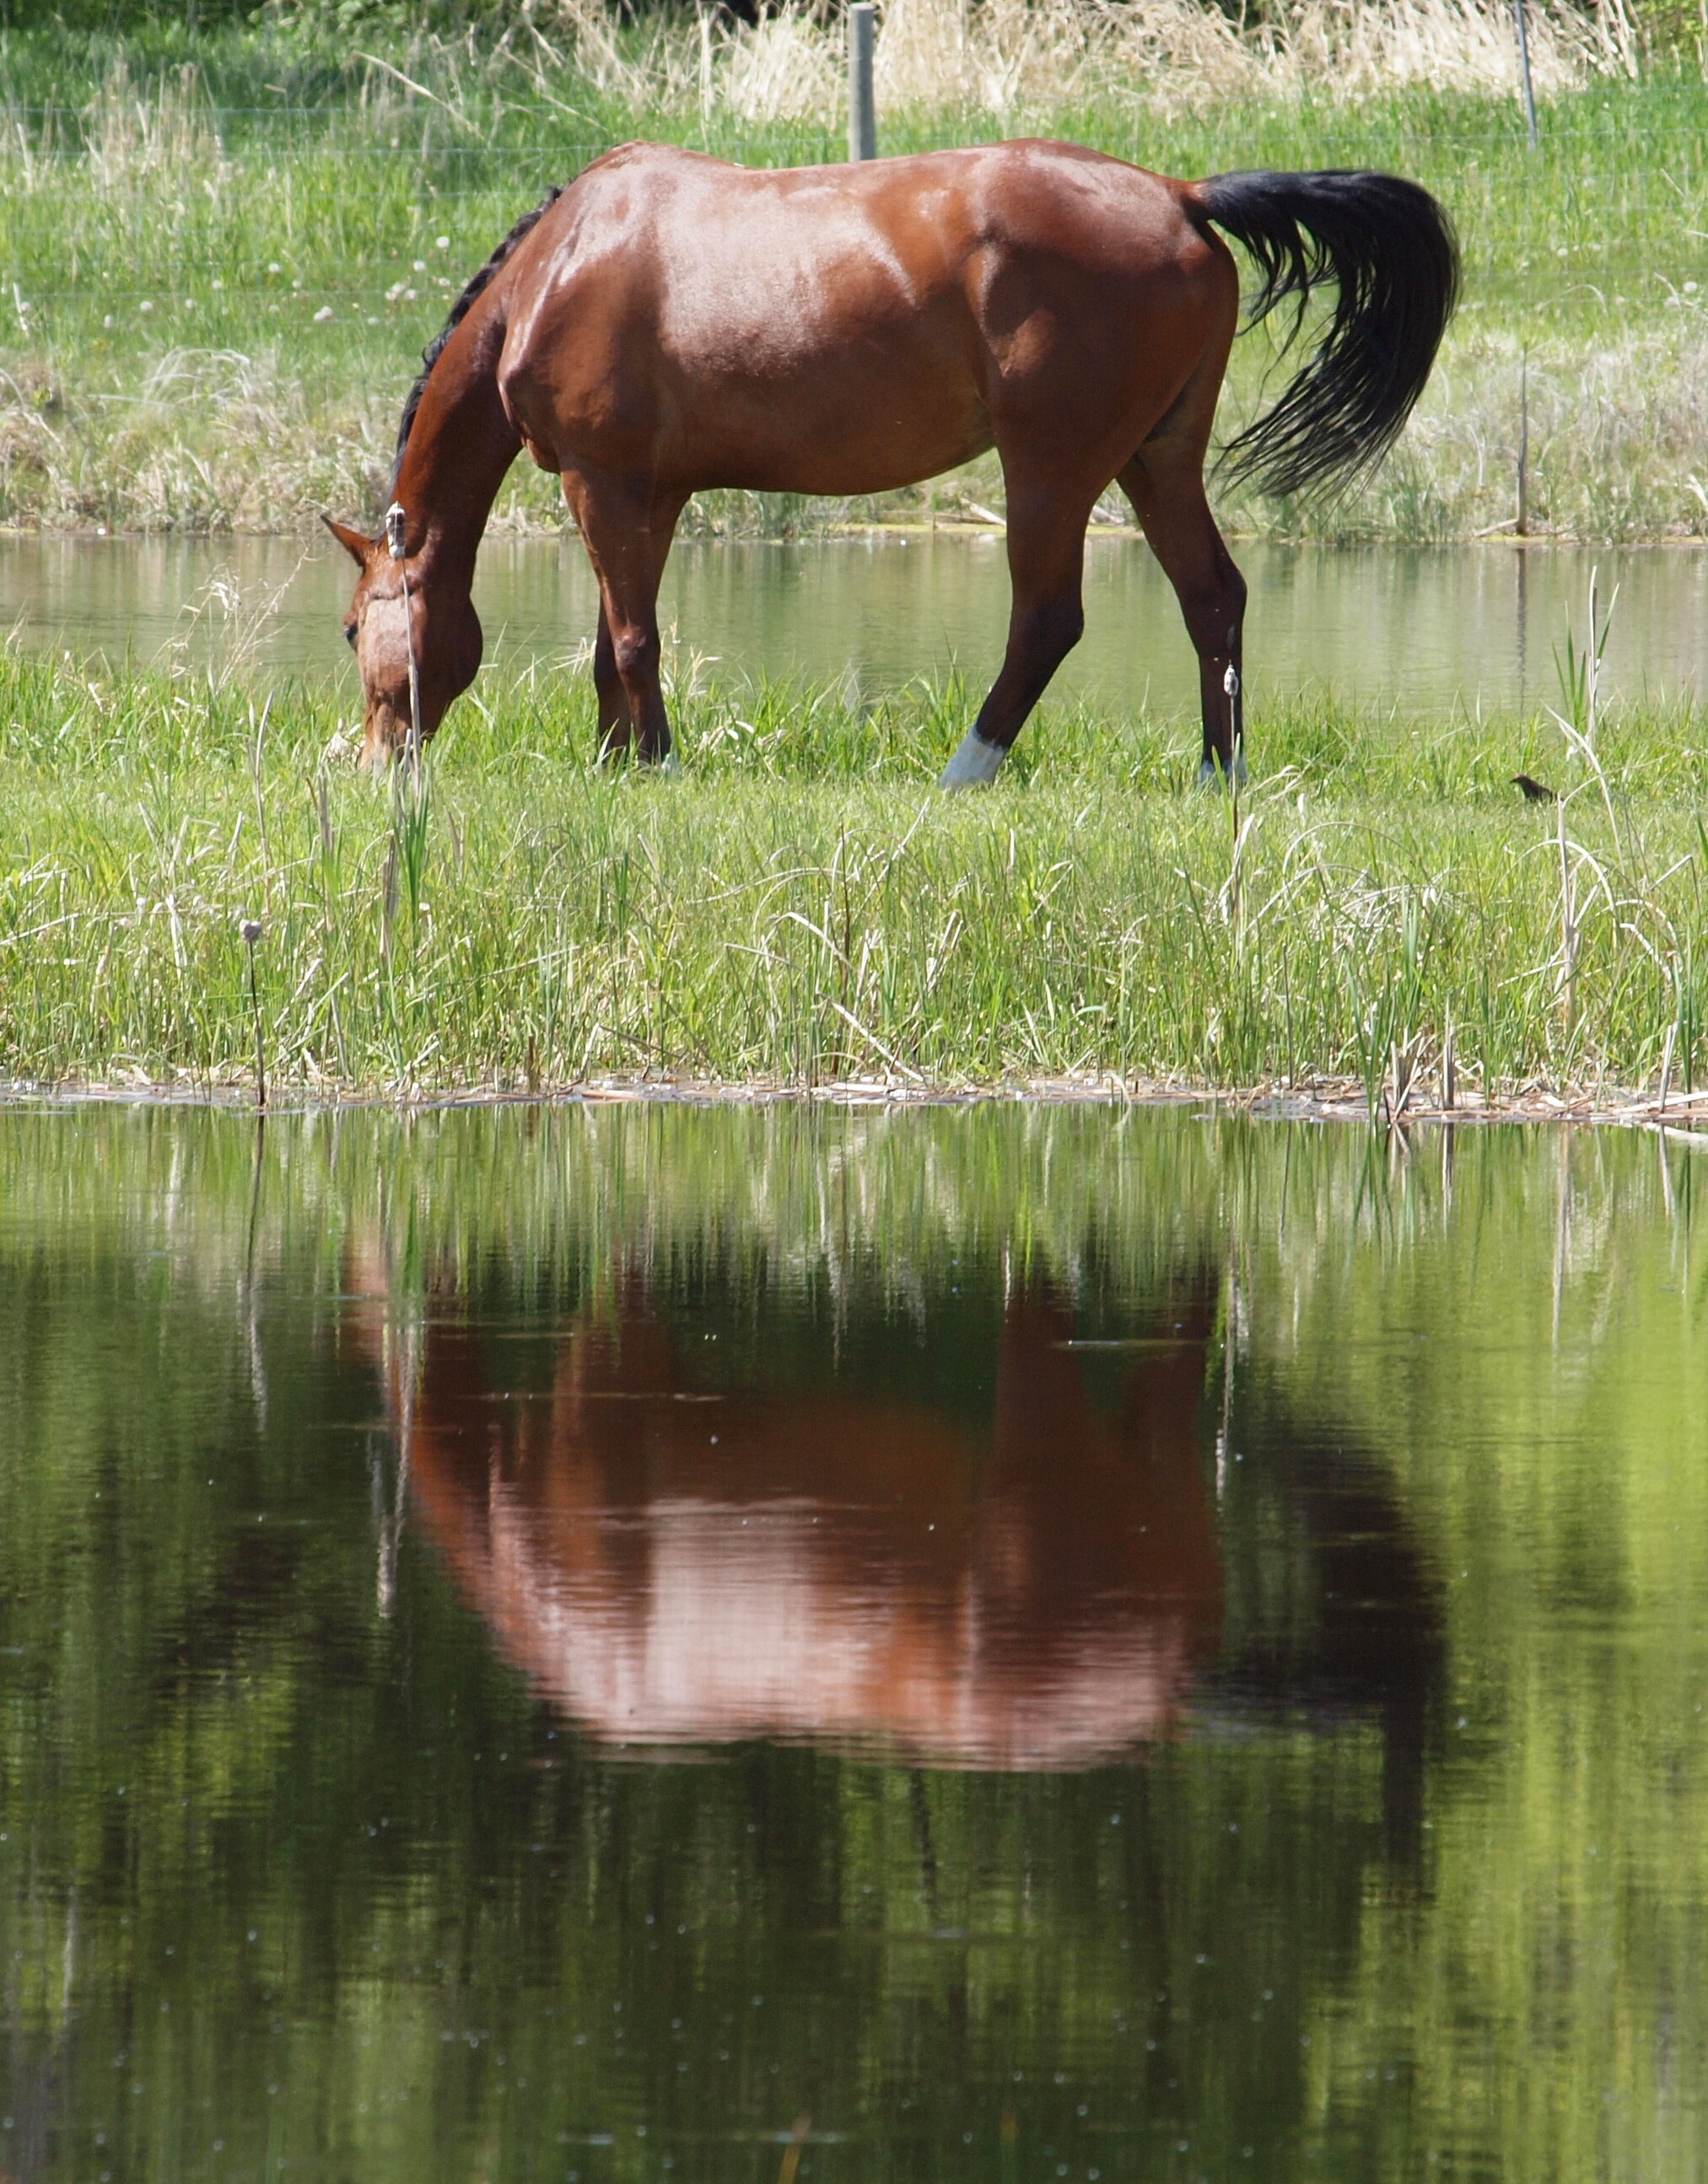 Horses by the Pond 002.jpg